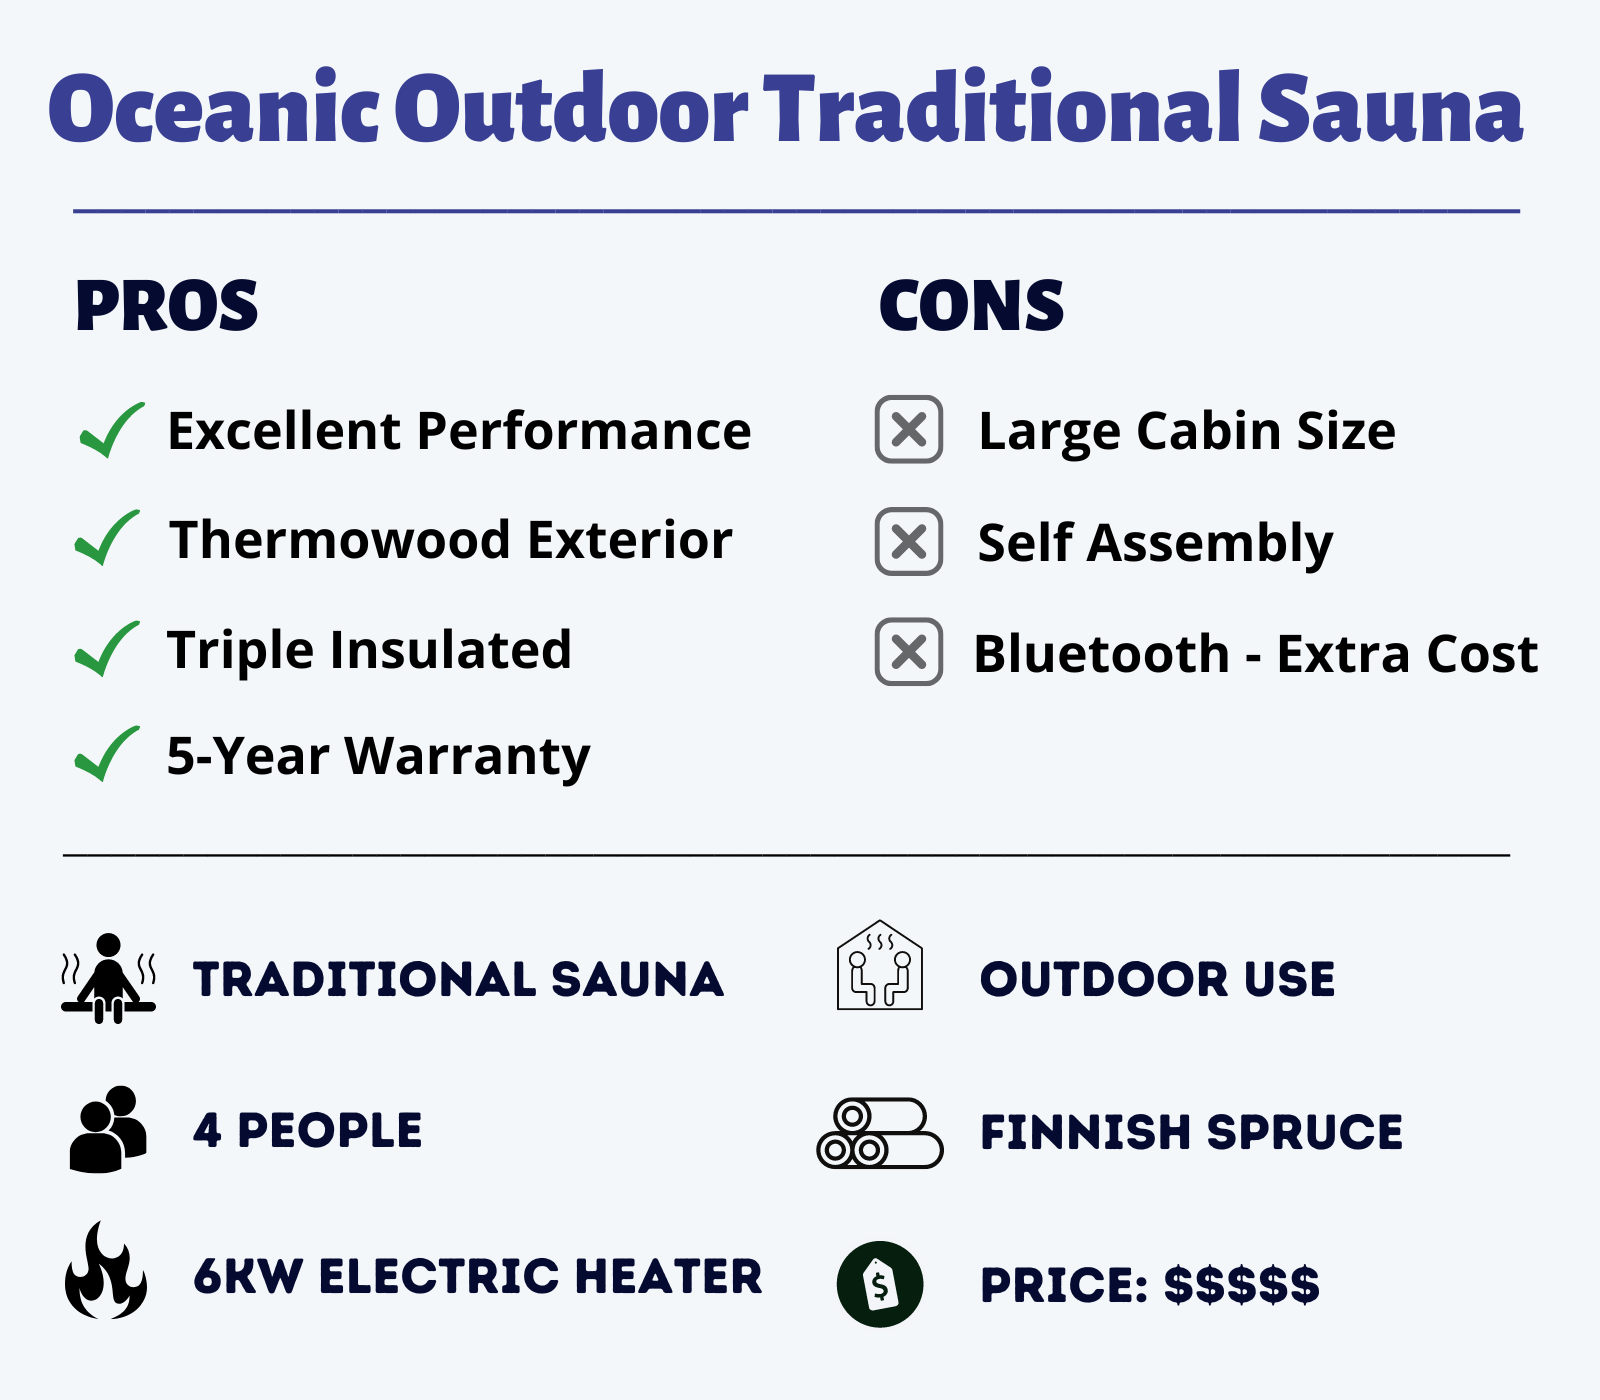 Oceanic Outdoor Traditional Sauna feature overview pros and cons